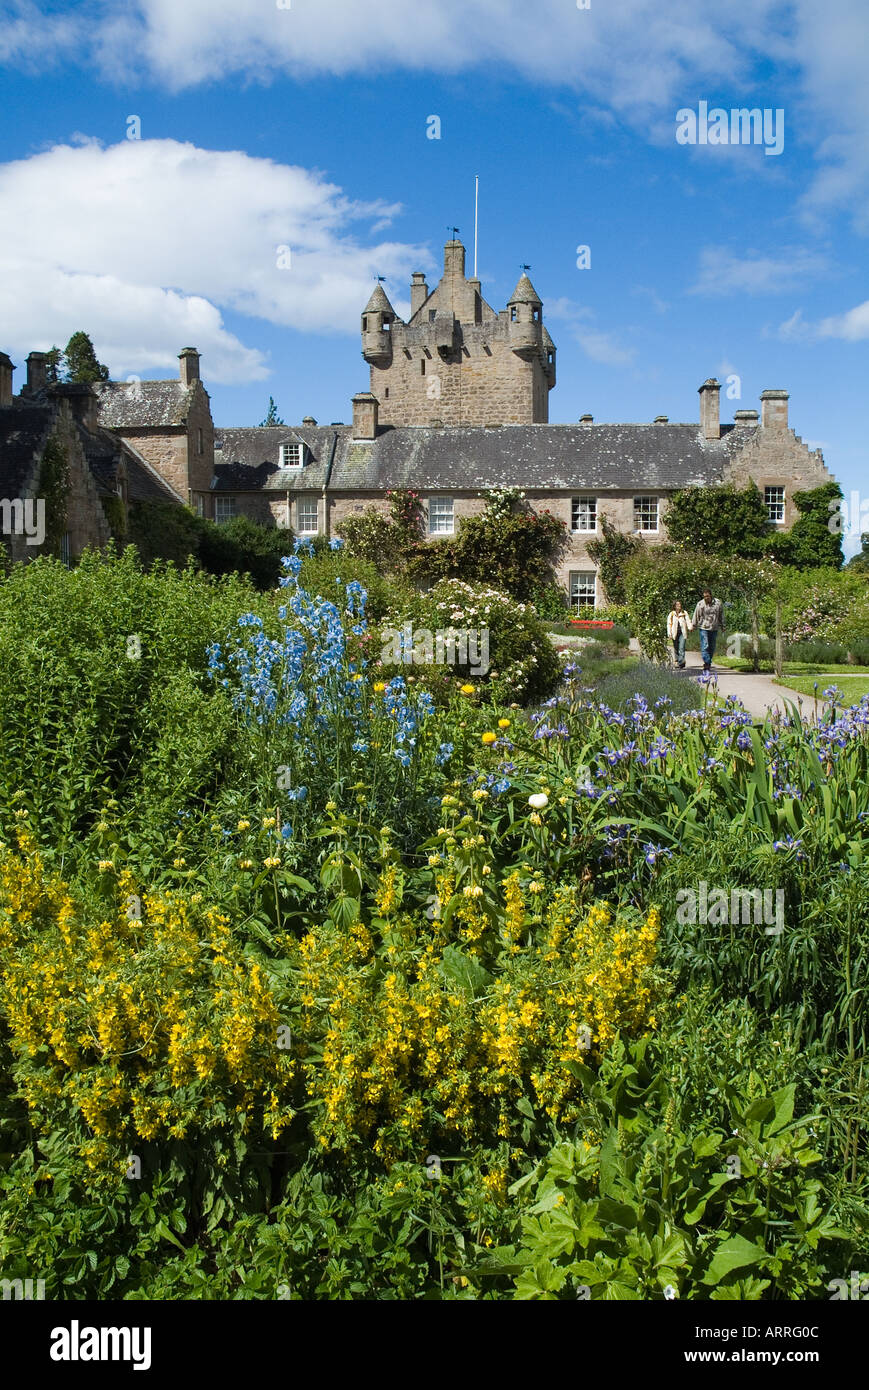 dh Cottage garden CAWDOR CASTLE INVERNESSSHIRE Couple walking in gardens flowers path Tower castles sightseers Scotland Stock Photo